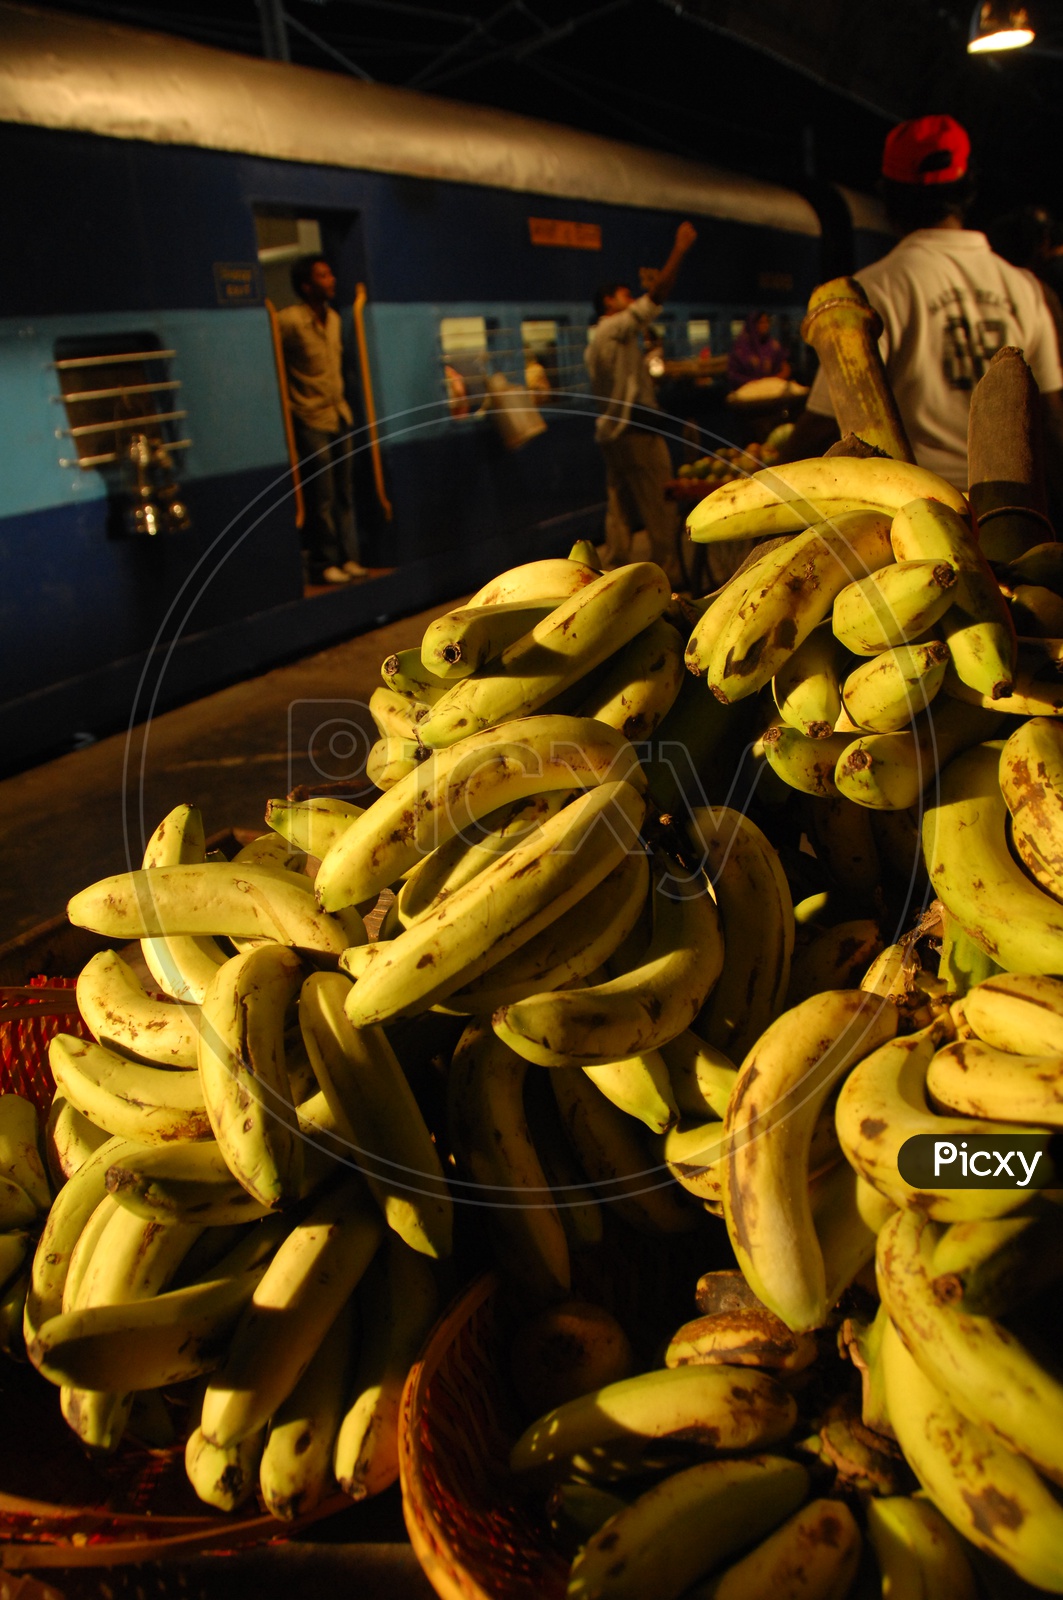 Photograph of banana's with train moving in the background